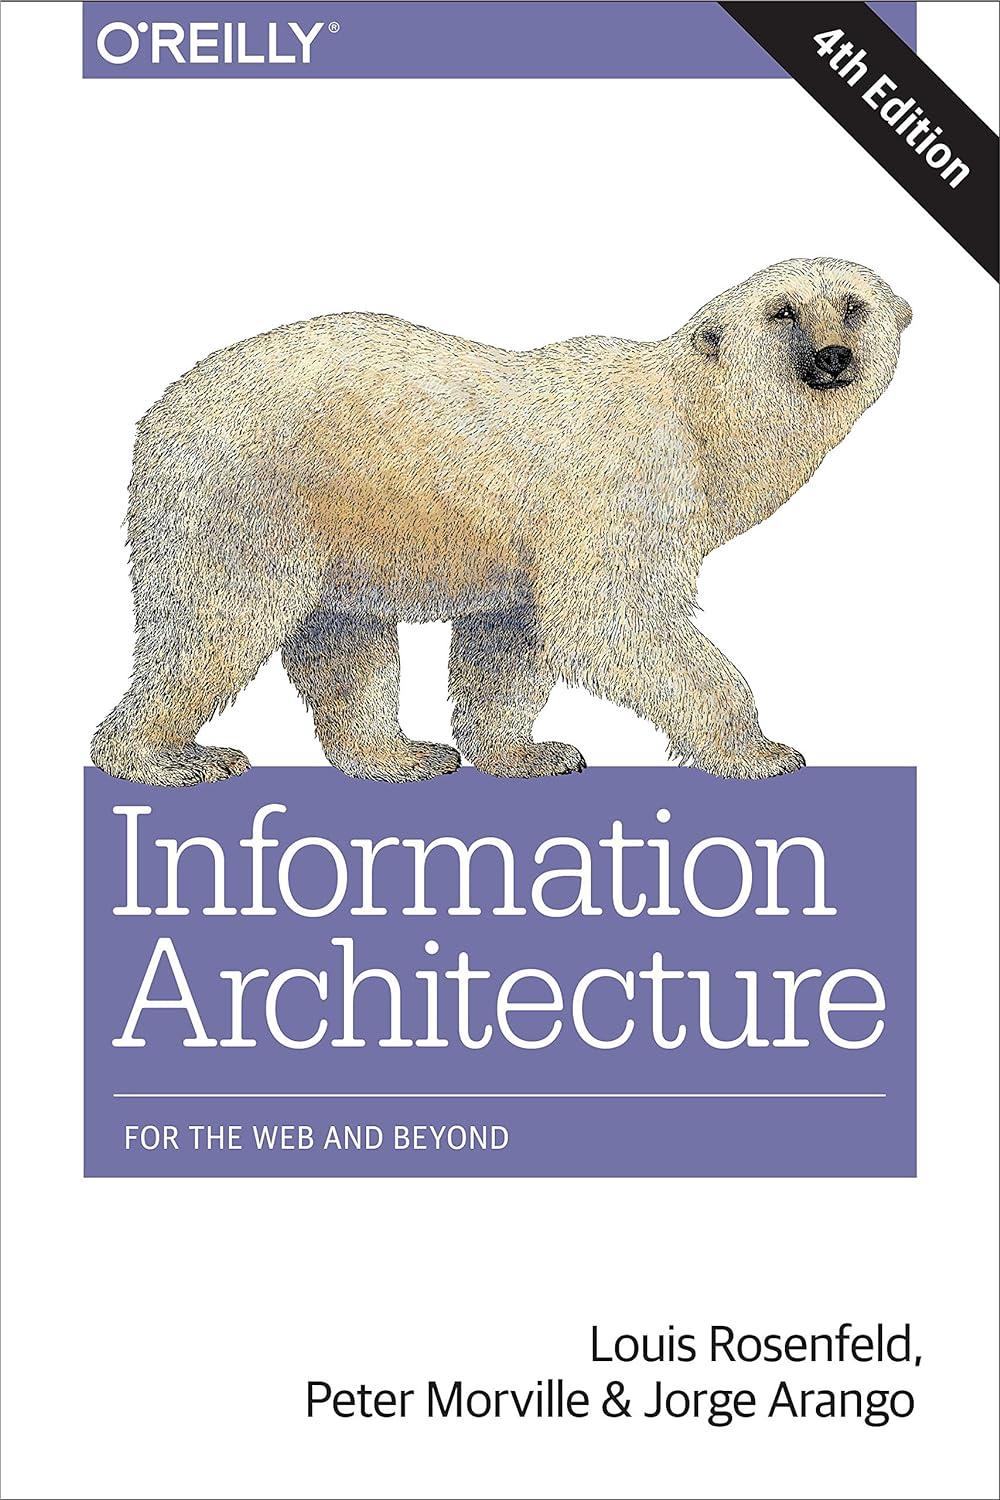 information architecture for the web and beyond 4th edition louis rosenfeld, peter morville, jorge arango